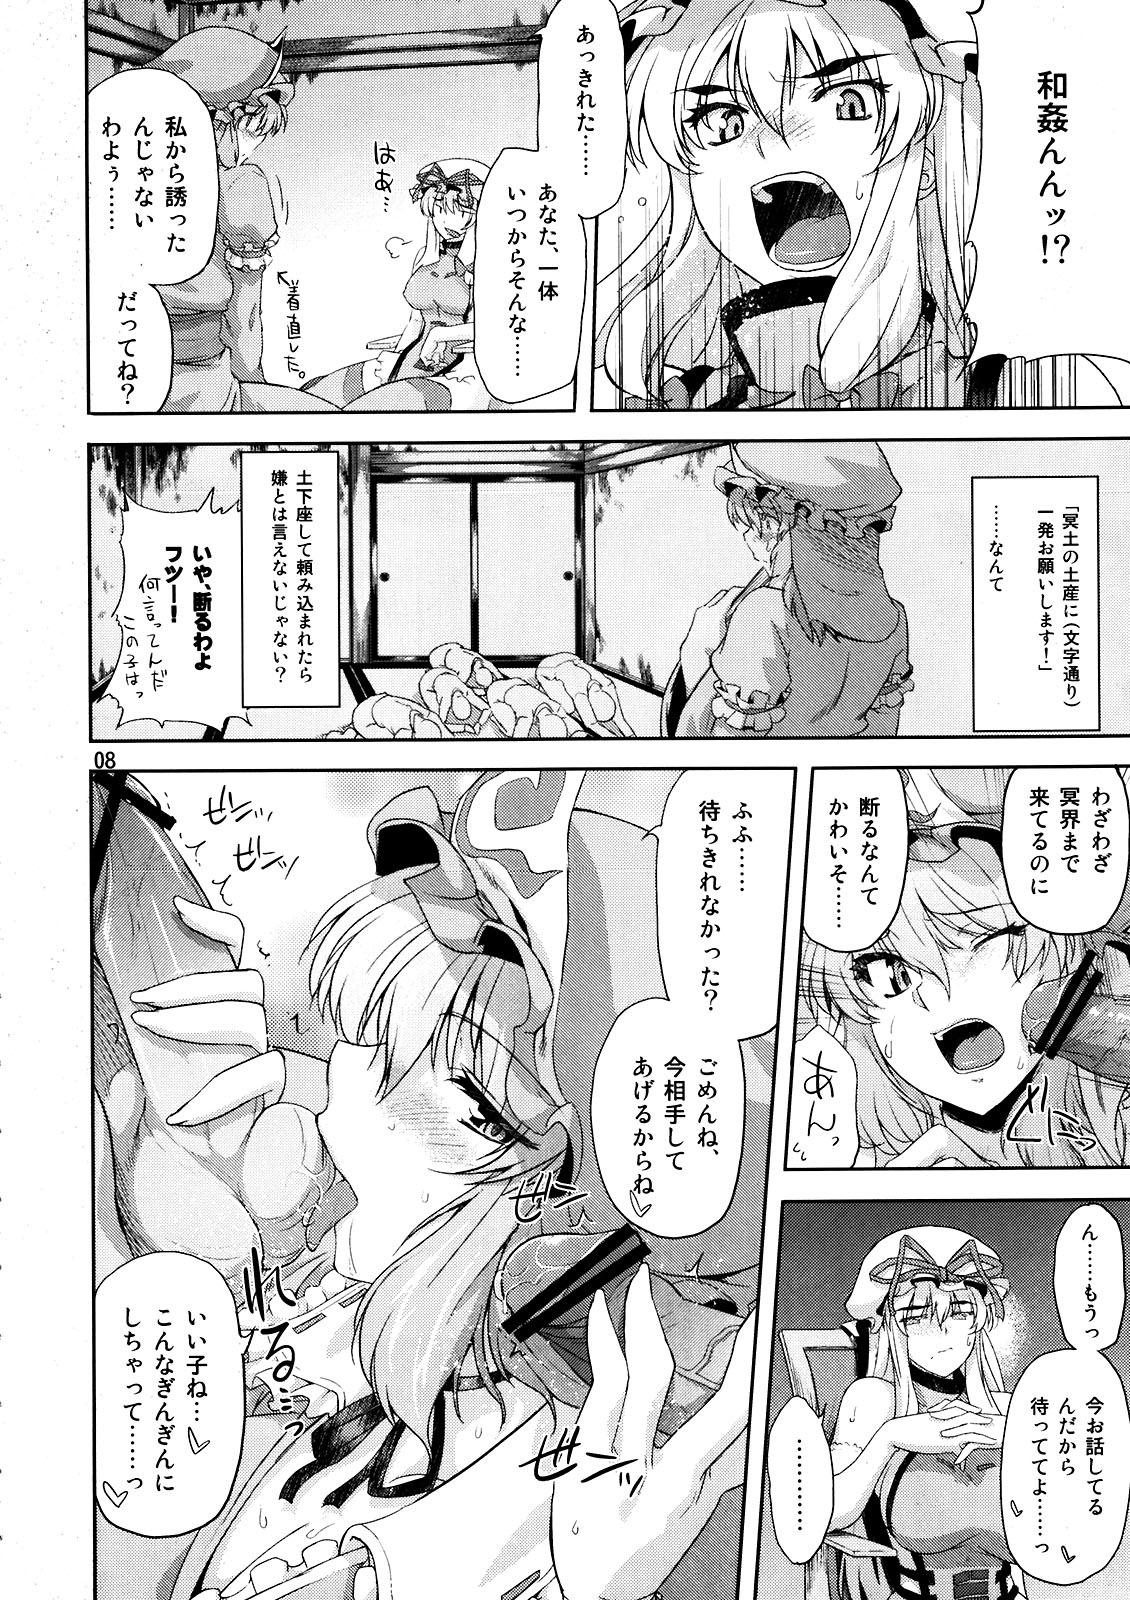 Petite Girl Porn Toshimaen 0 - Touhou project Shaking - Page 8